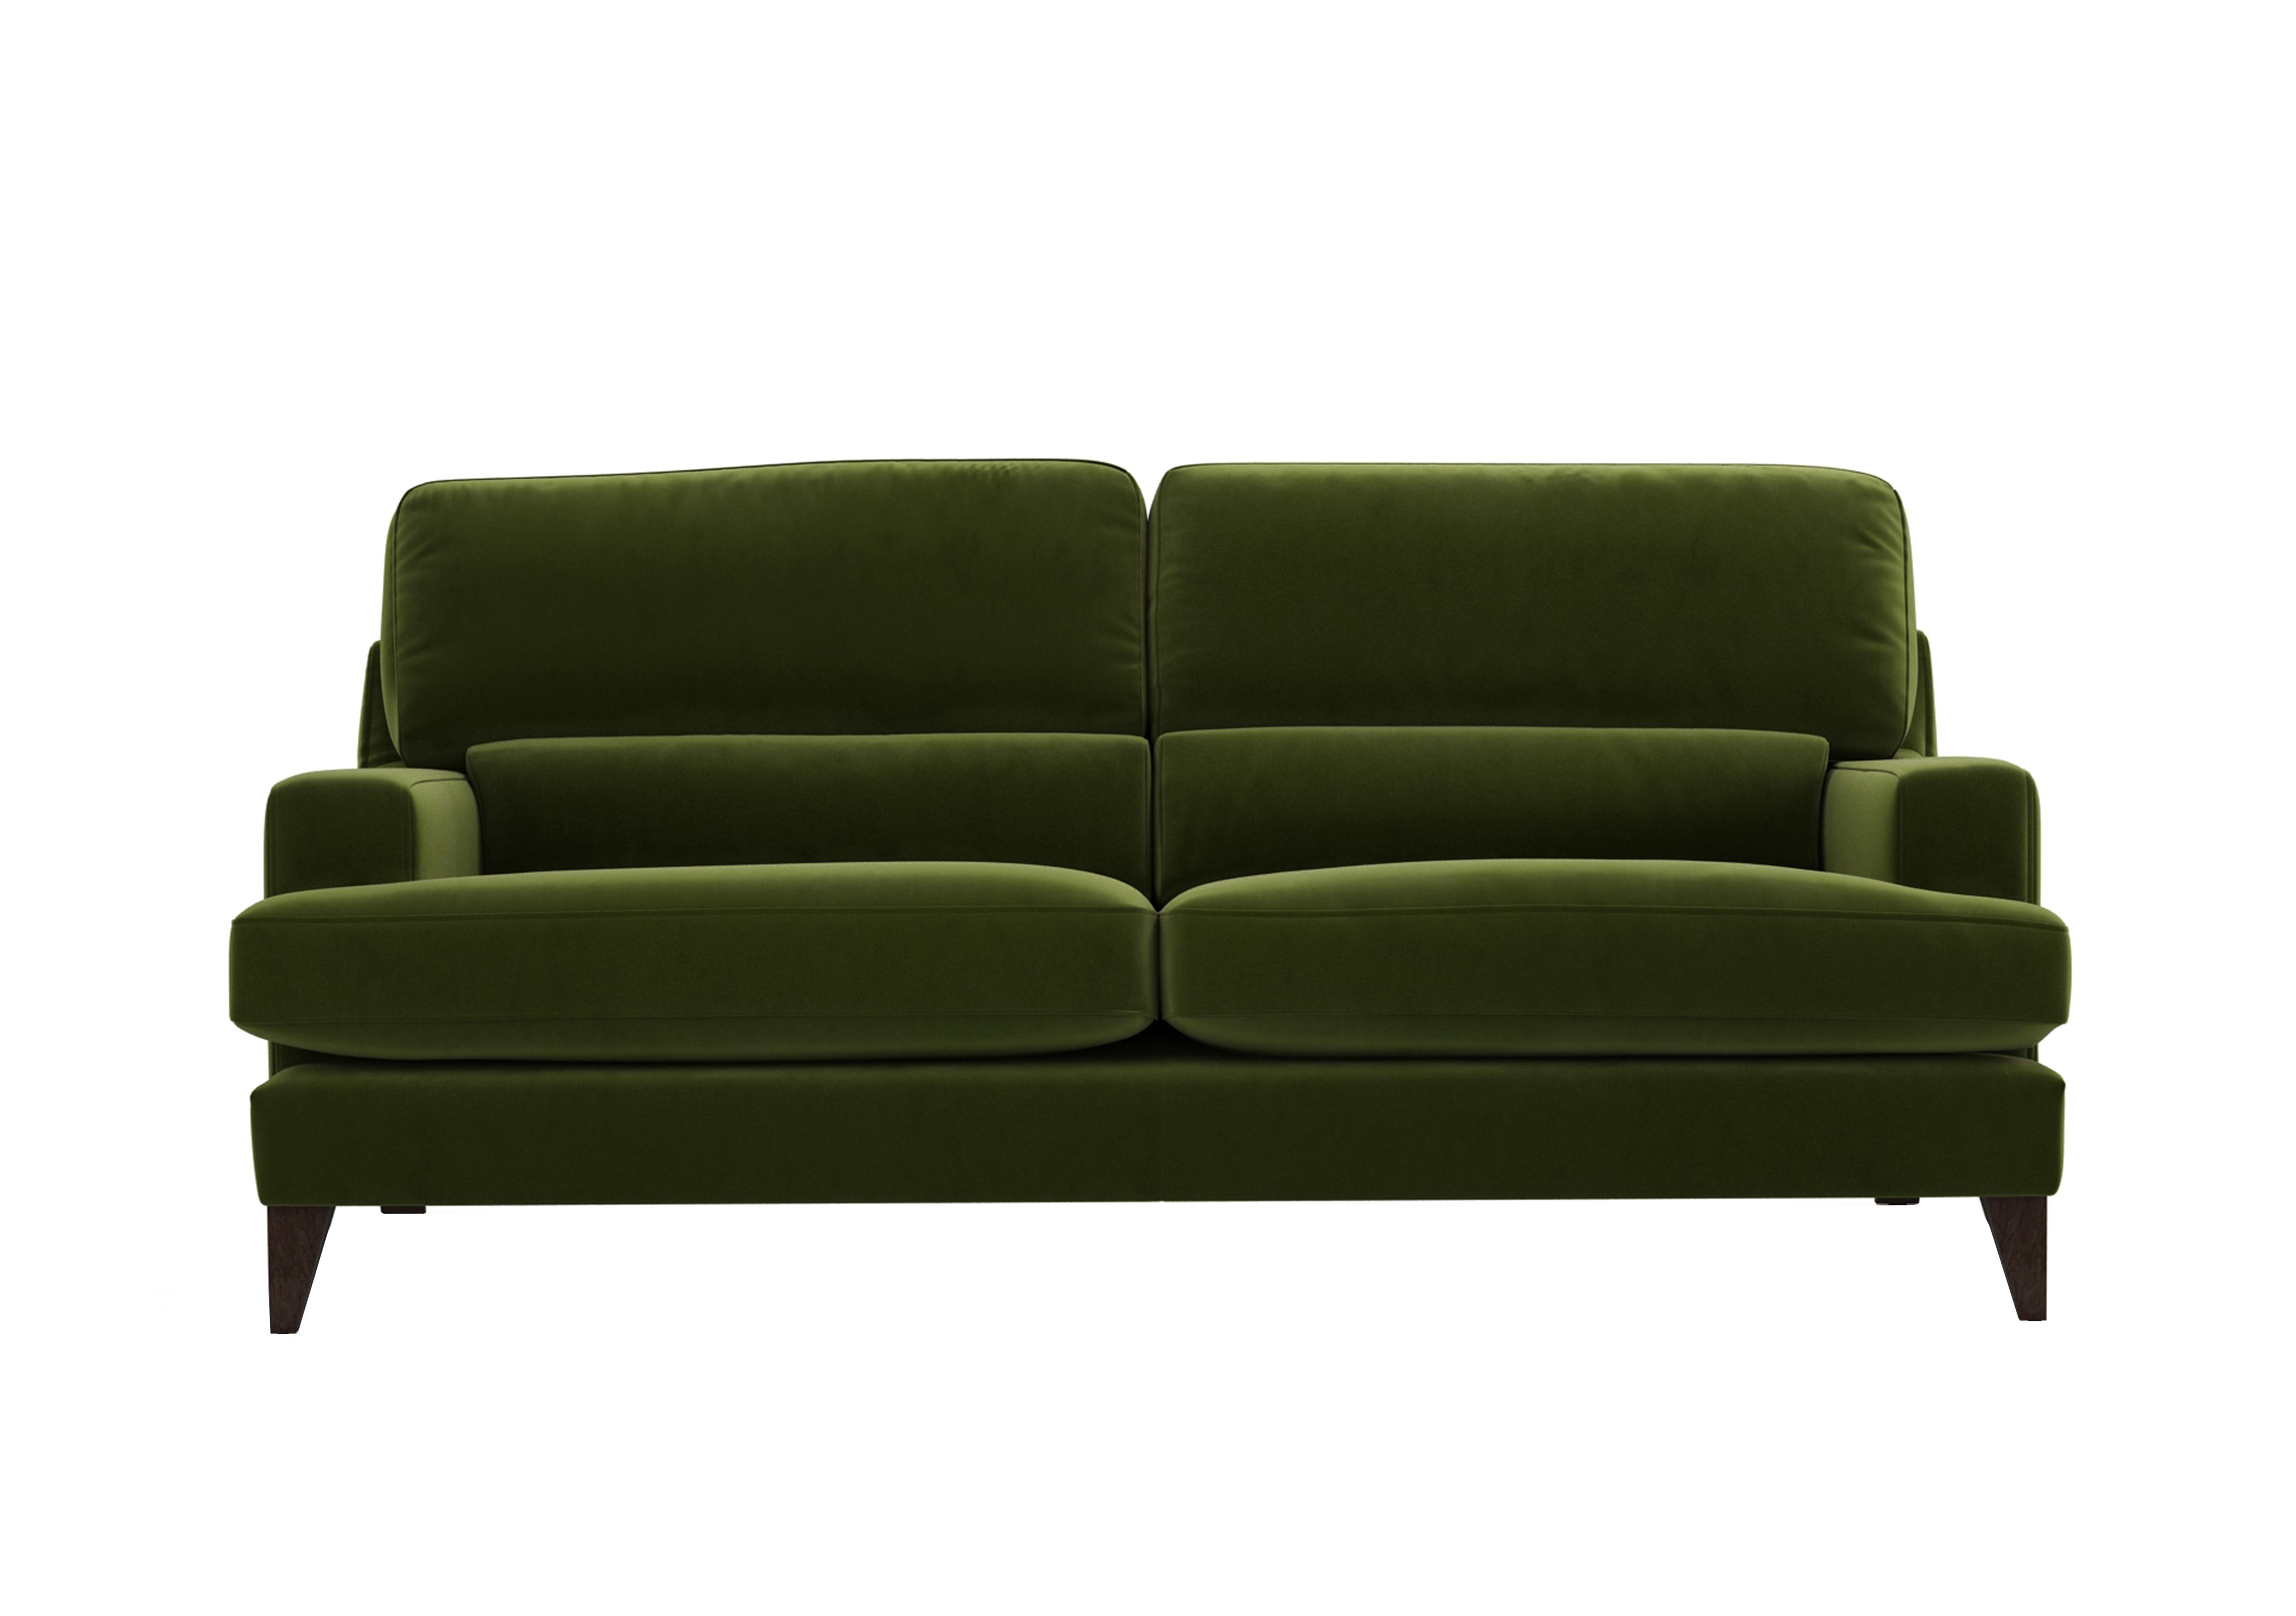 Romilly 3 Seater Fabric Sofa in Woo160 Woodland Moss Wa Ft on Furniture Village